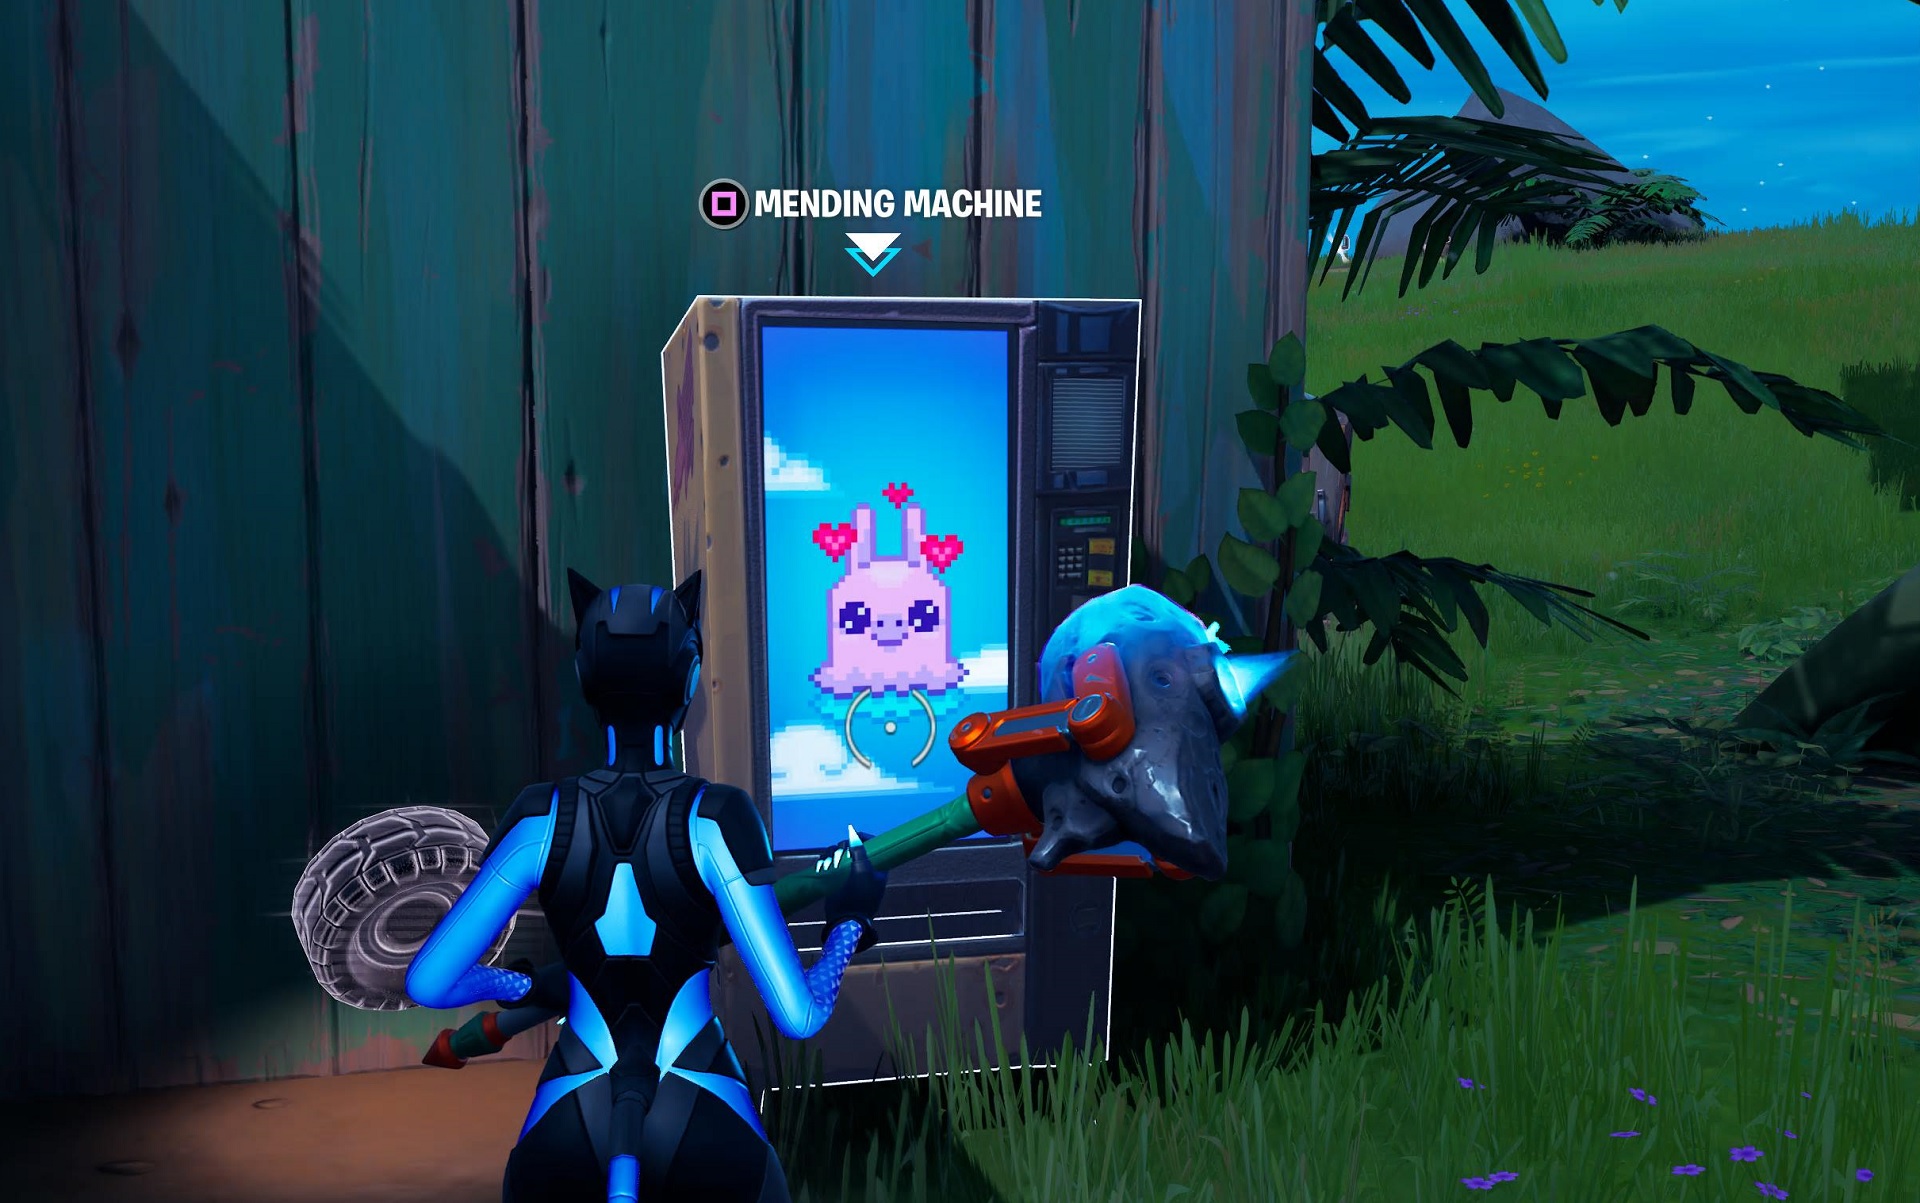  Here's where you can find every Mending Machine in Fortnite 